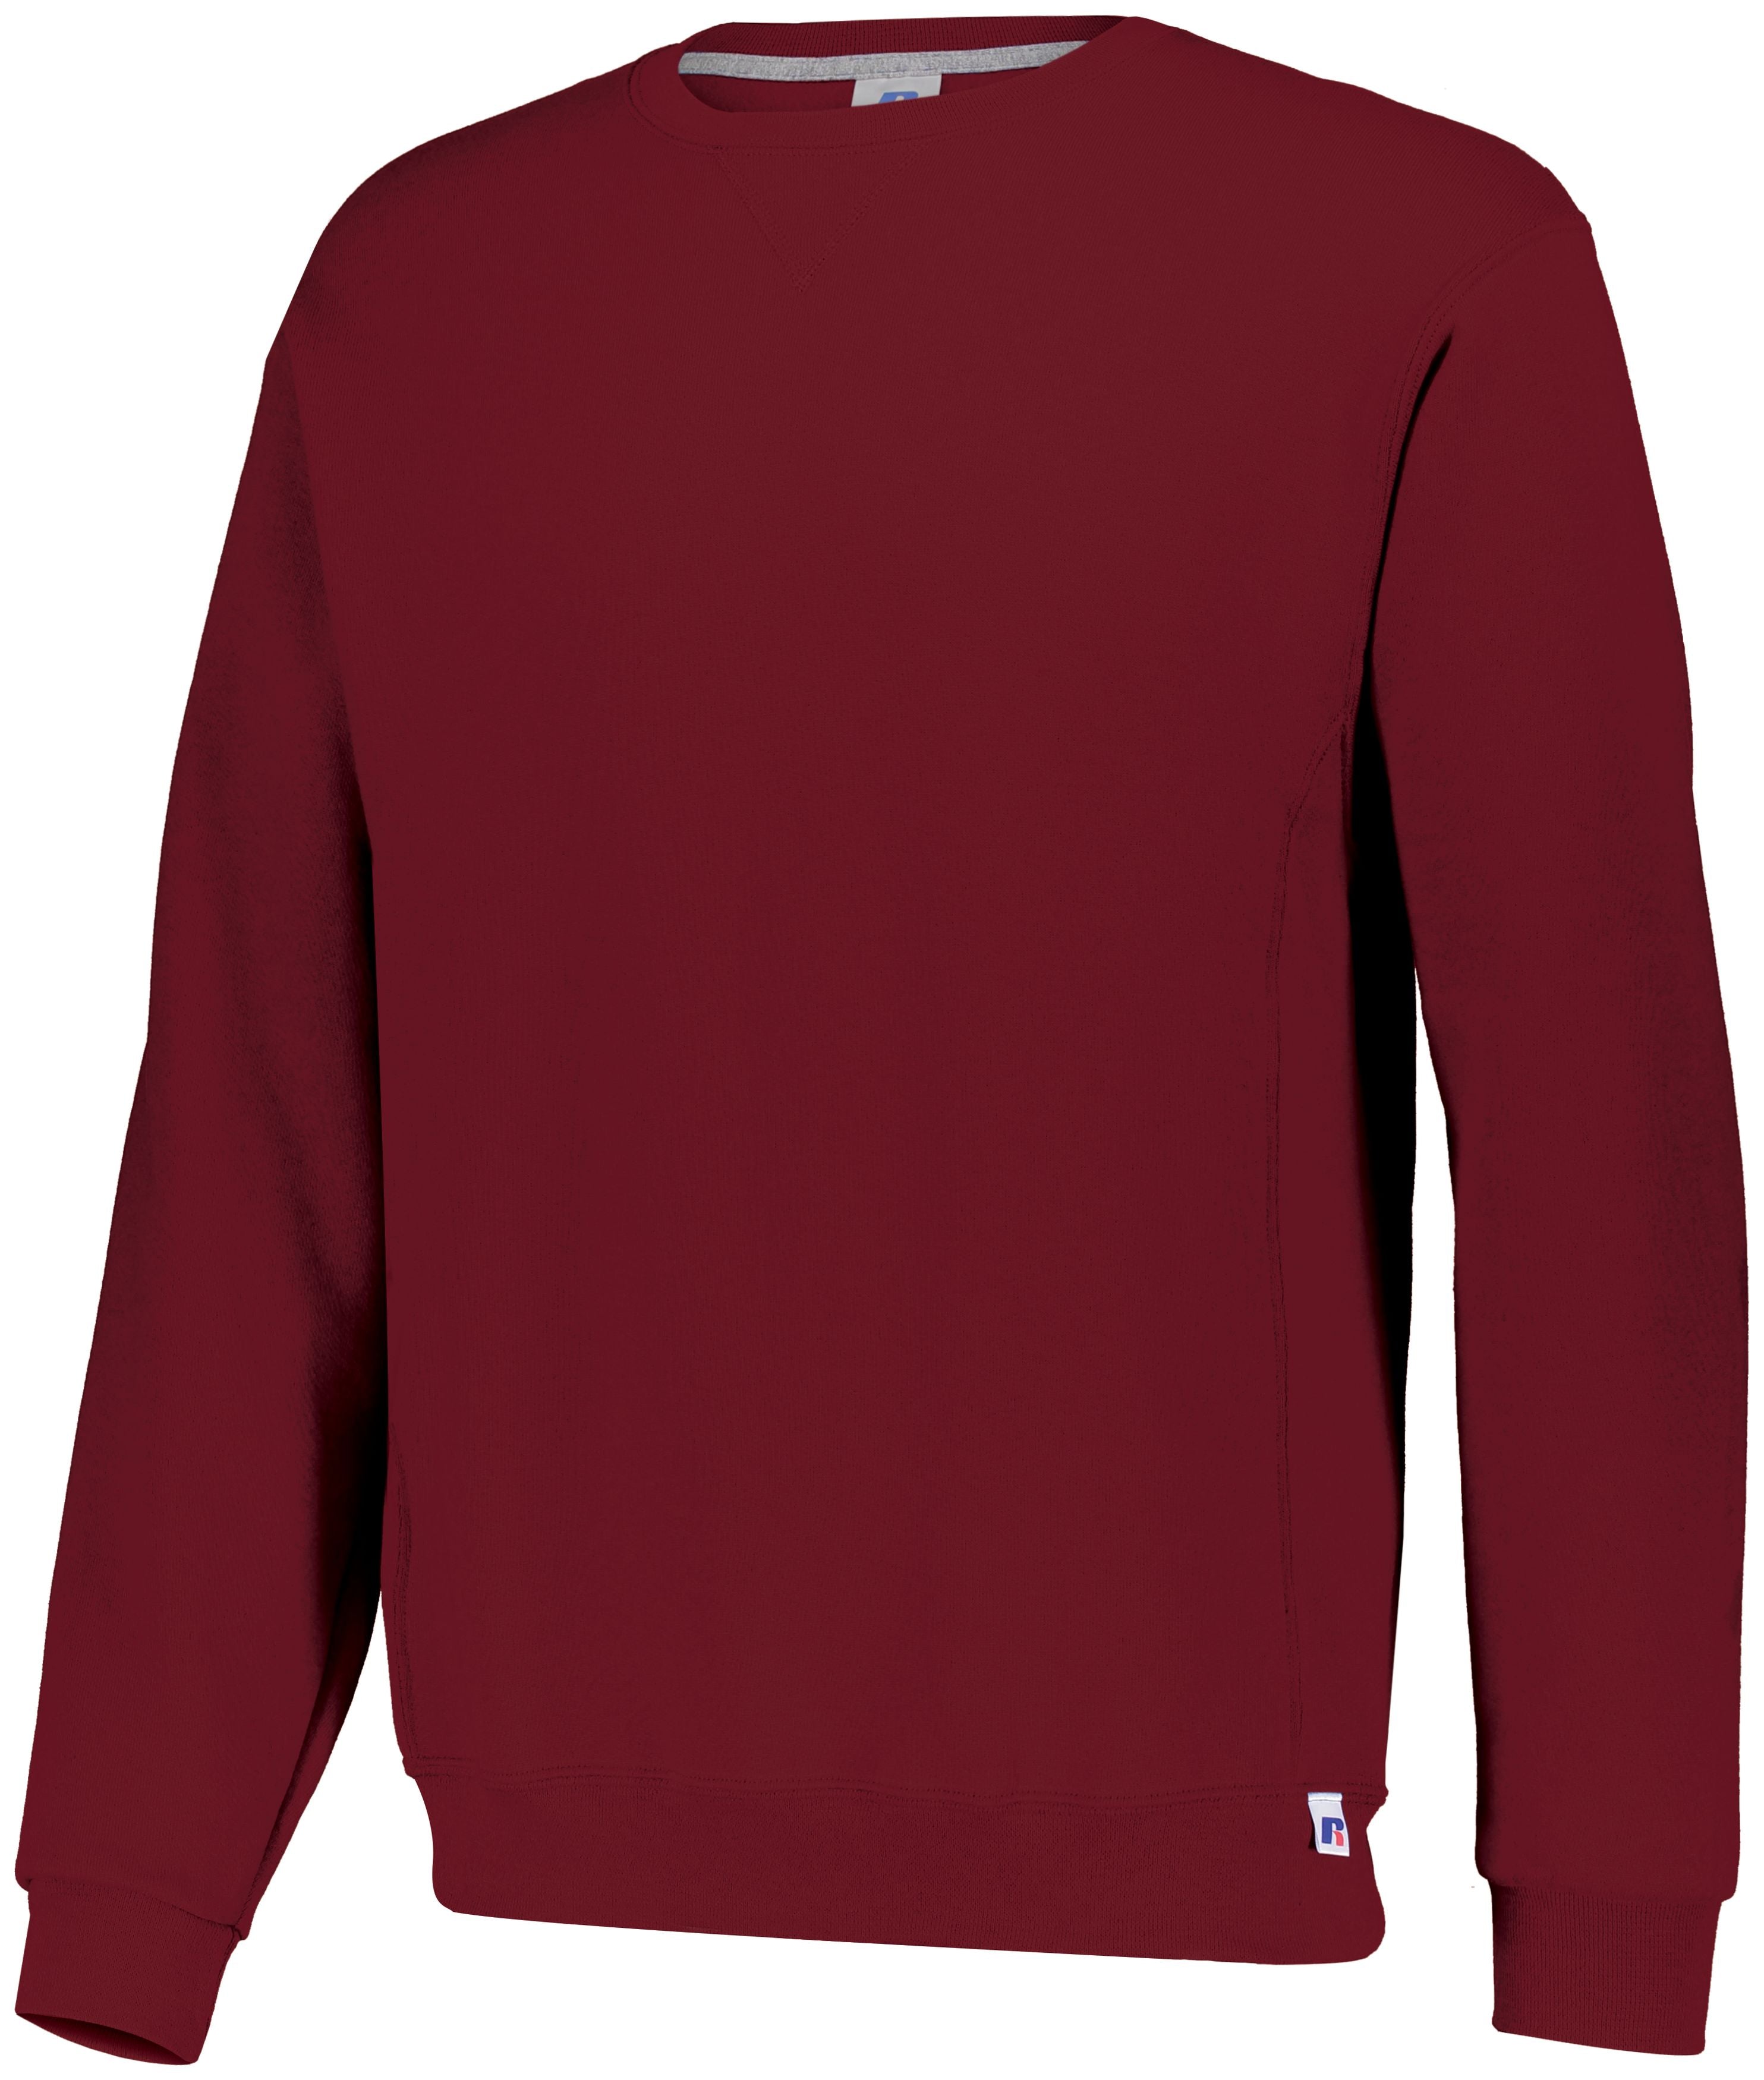 Russell Athletic Dri-Power  Fleece Crew Sweatshirt in Cardinal  -Part of the Adult, Adult-Sweatshirt, Russell-Athletic-Products, Outerwear product lines at KanaleyCreations.com